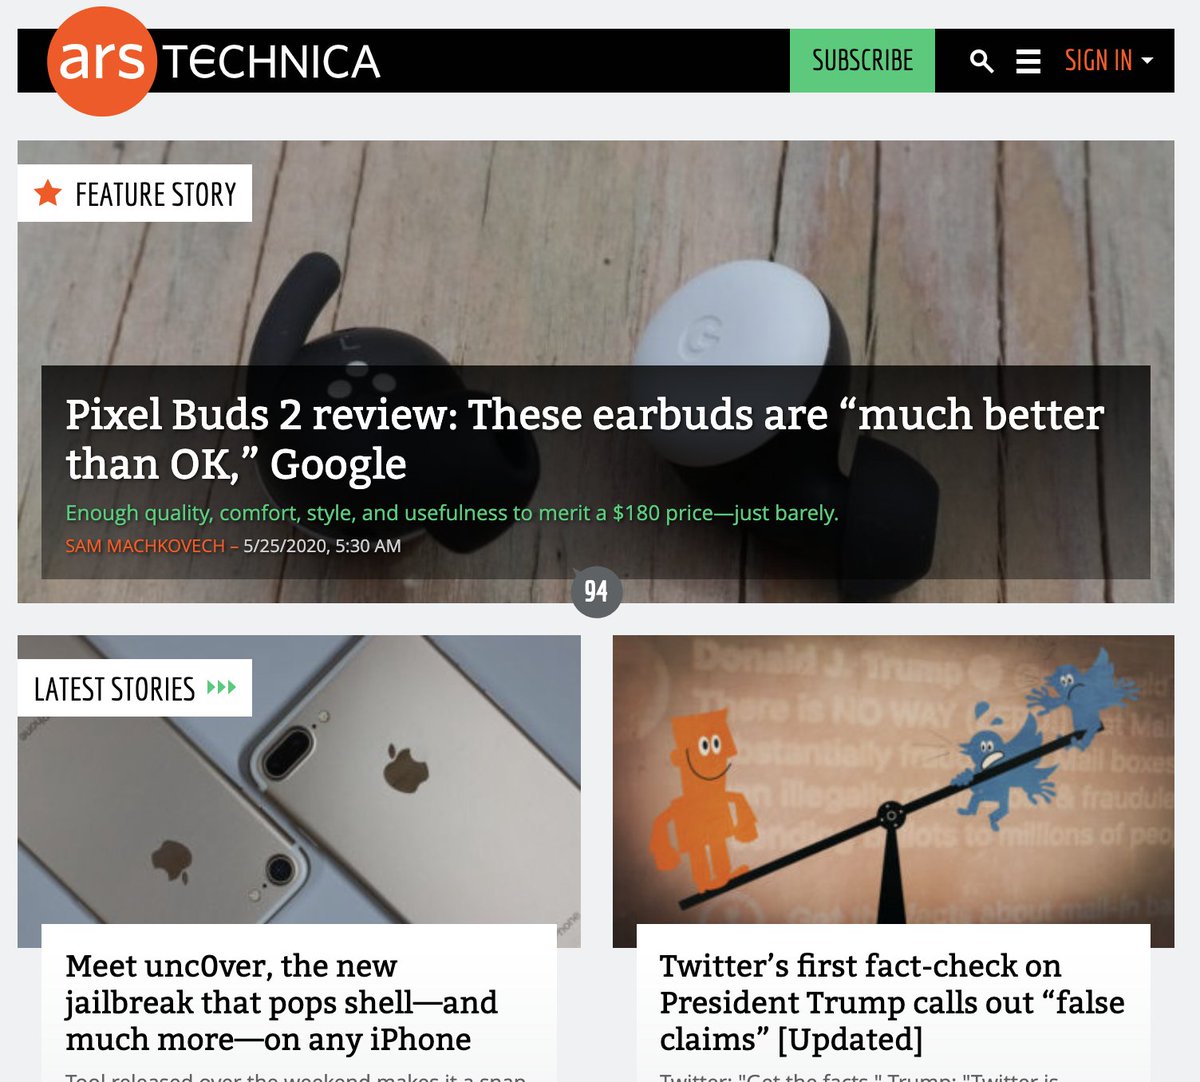 And are people expecting MORE from websites now?Here's arstechnica in 2001 vs today. Today's design has more photos, but it's SIMPLER. And I guarantee you could spruce up the text-heavy 2001 design and launch it today as a "revolutionary" "content-forward" blah blah blah